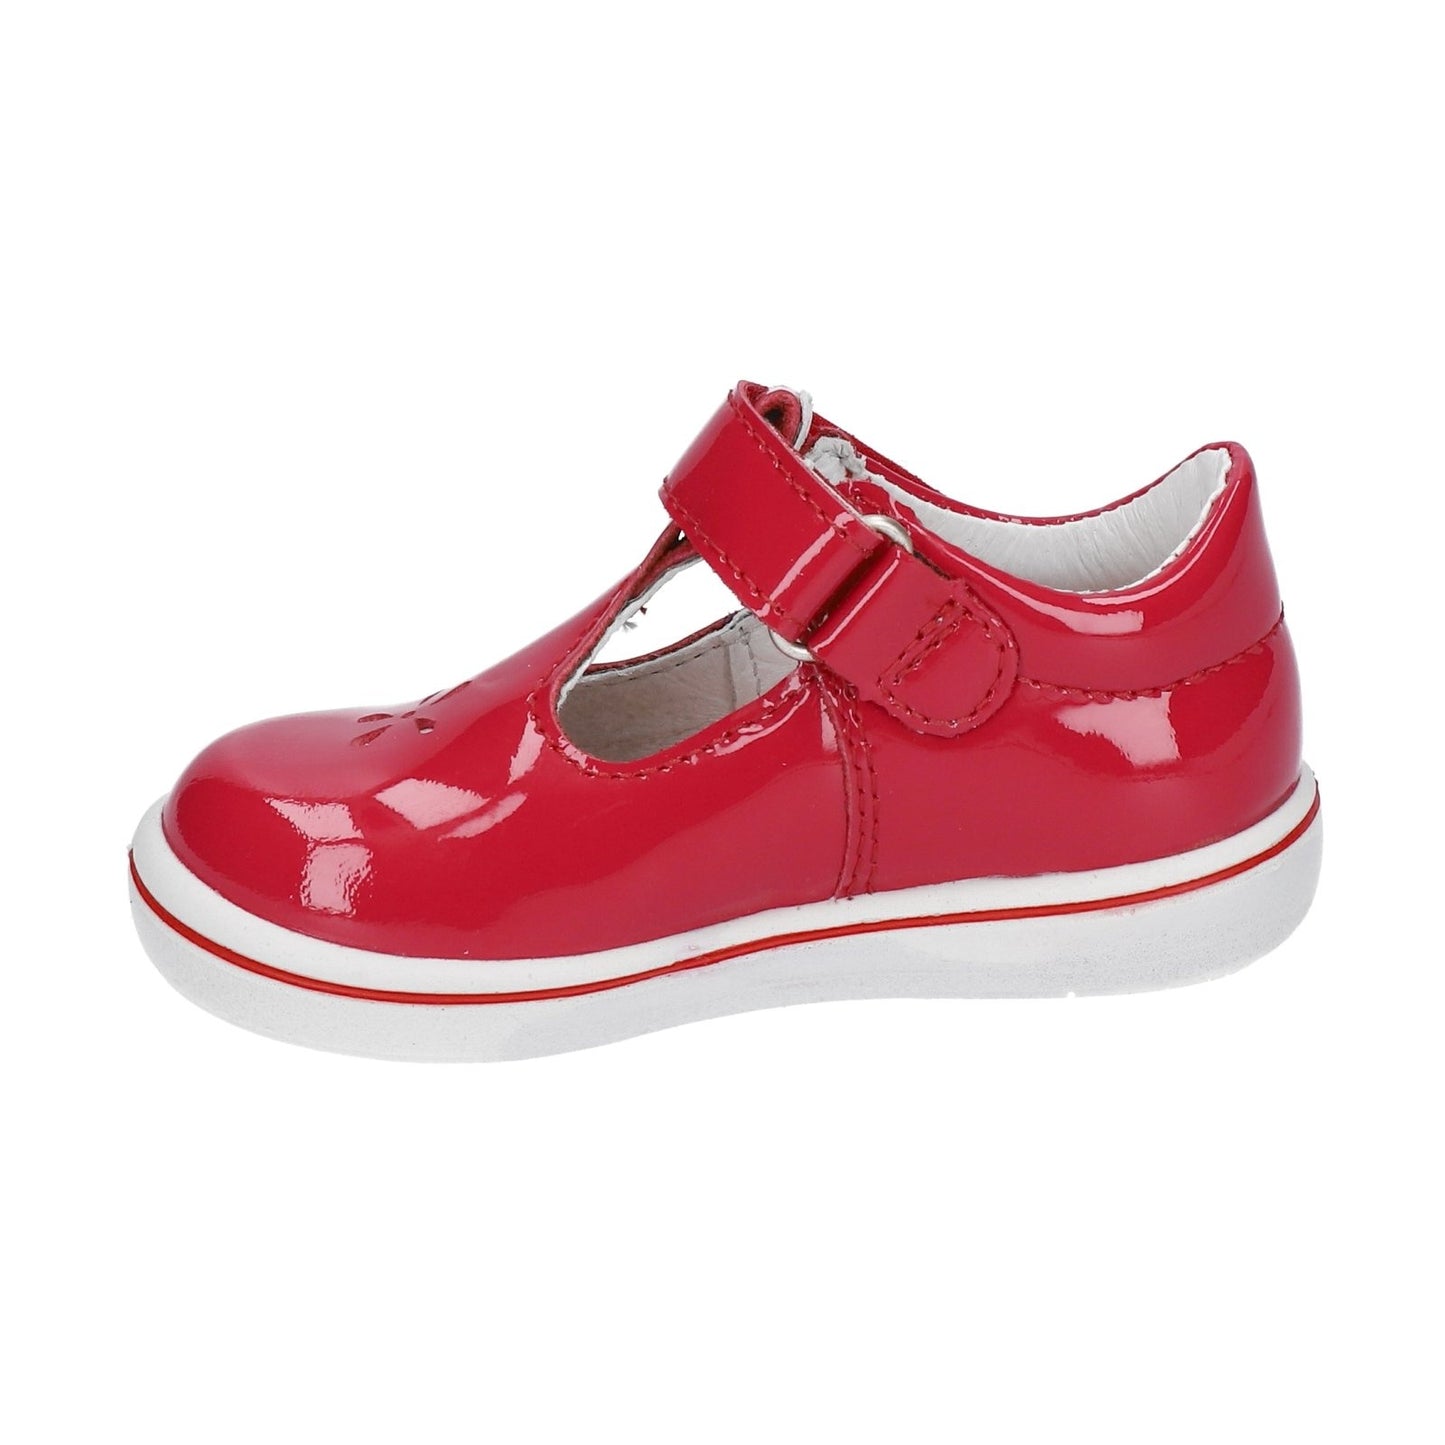 Winona Girl's T-Bar Shoe in Cherry Red Patent